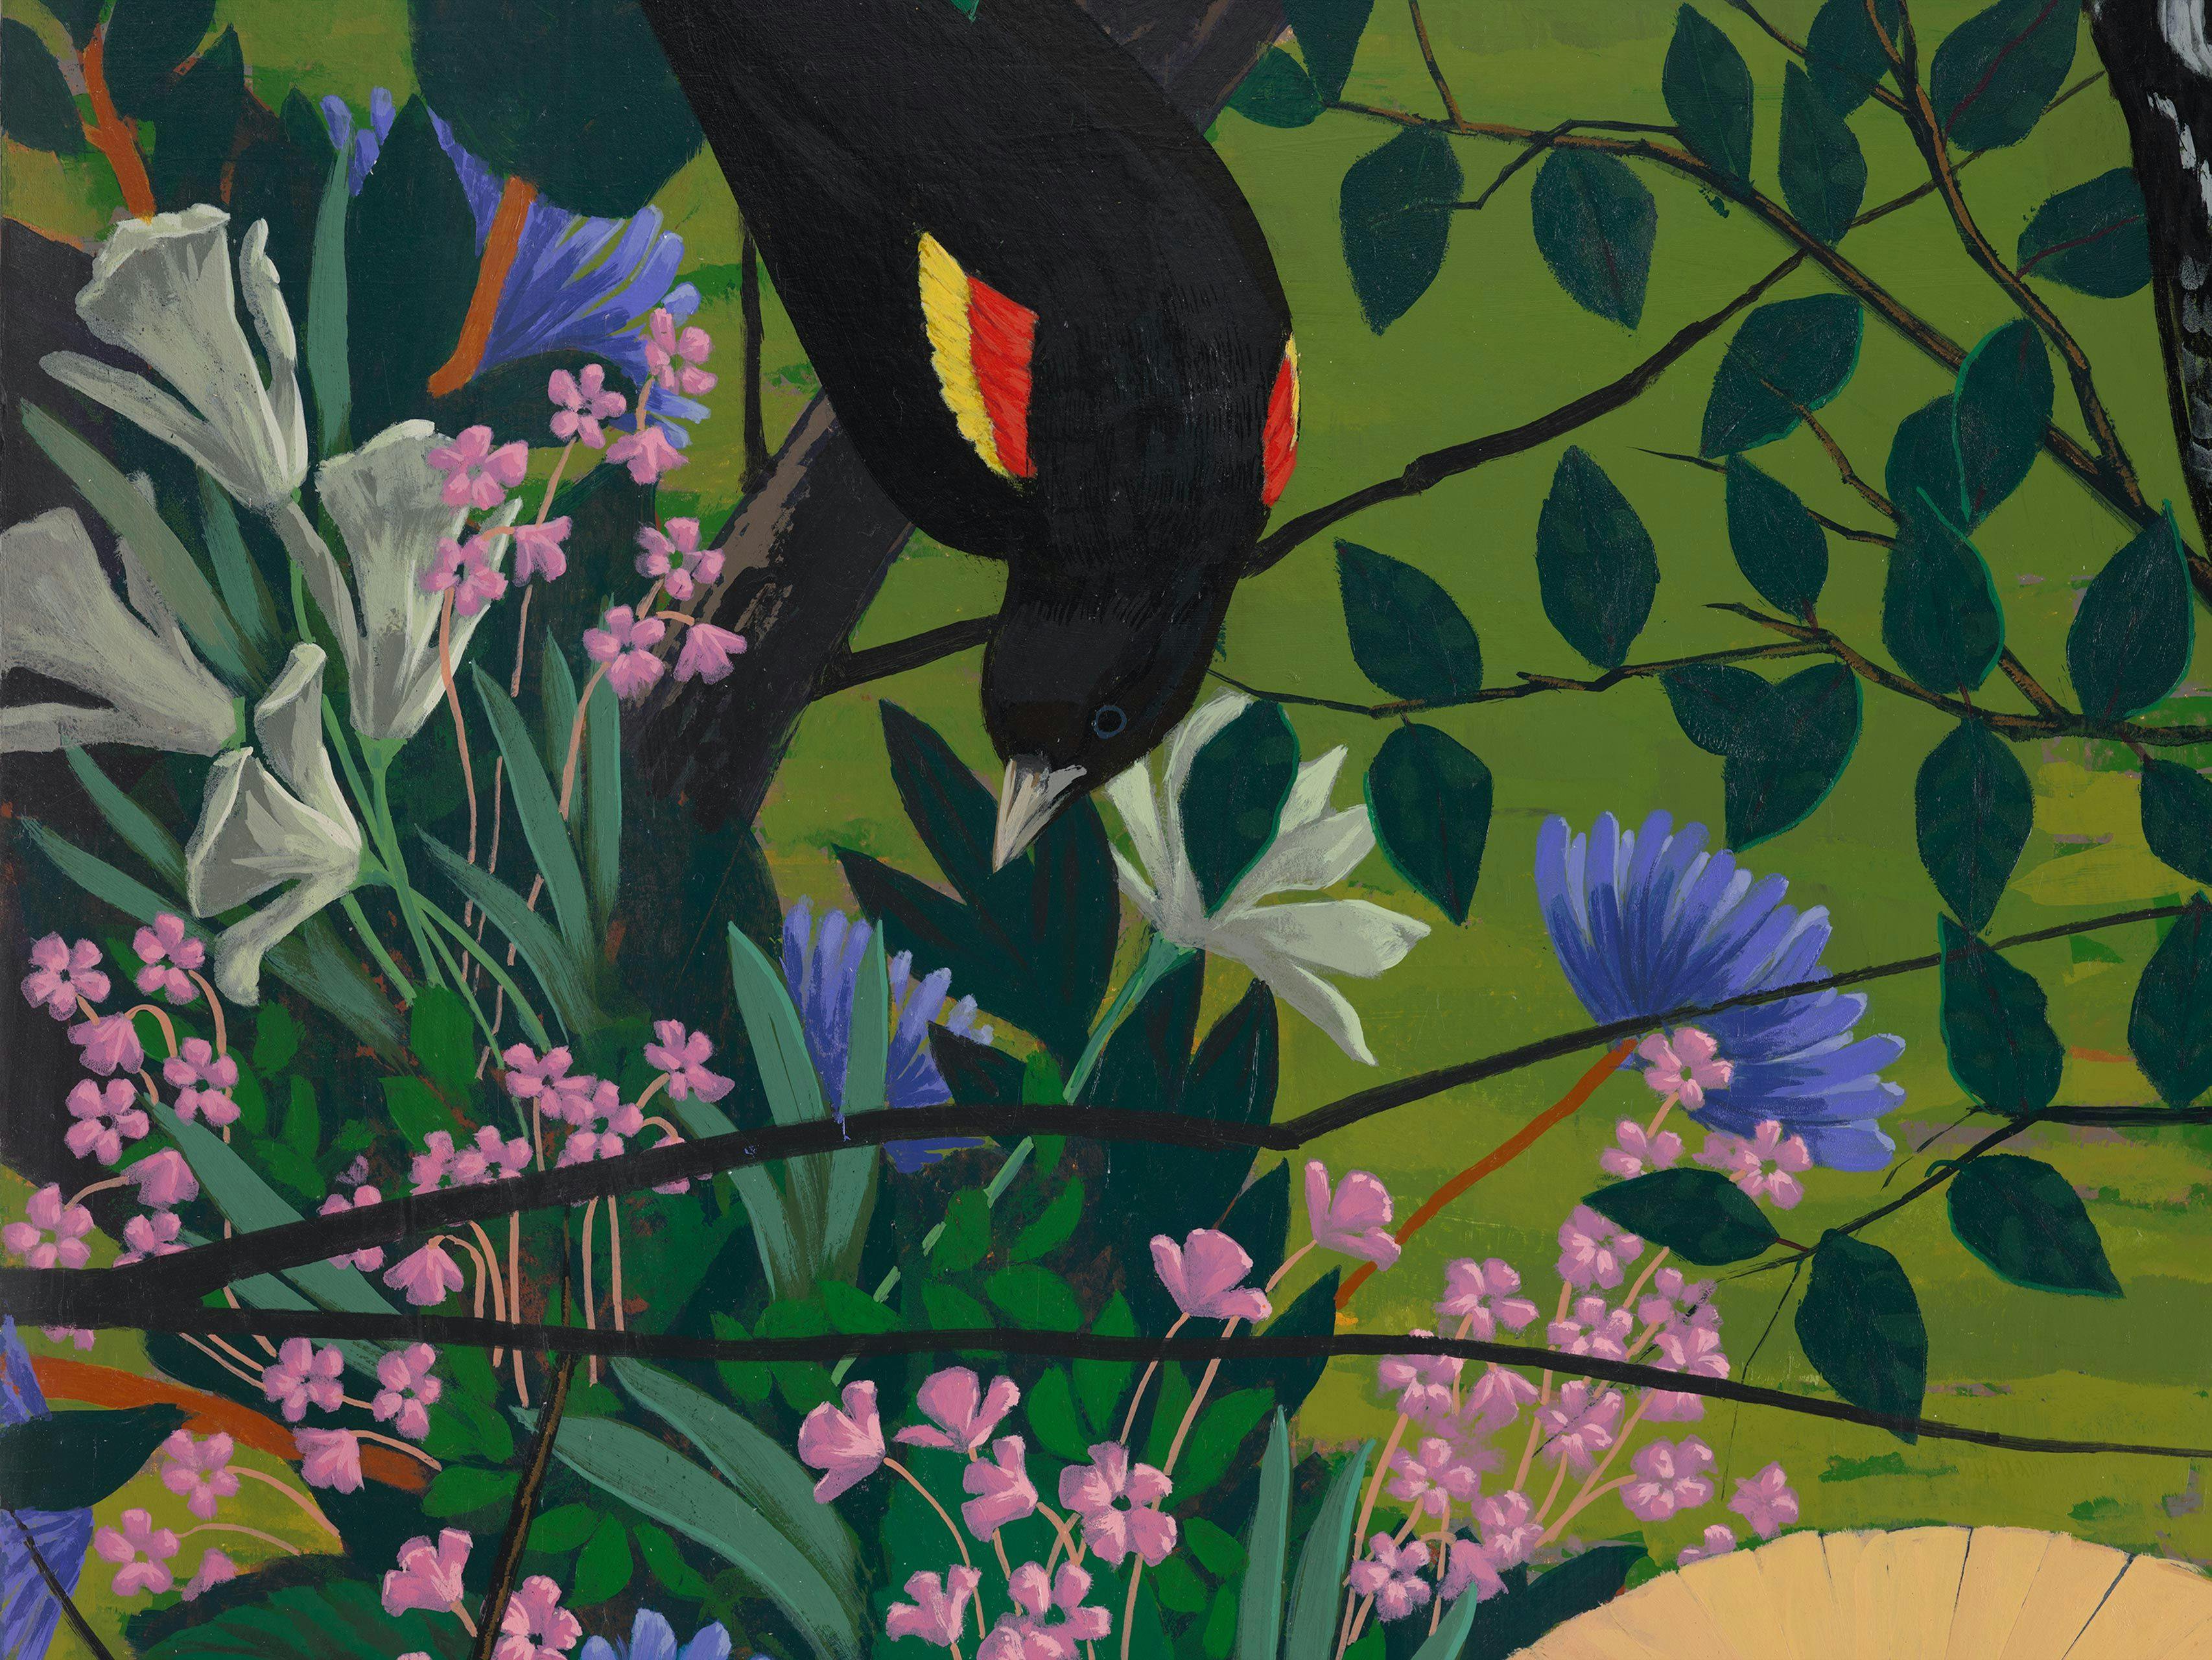 A detail of a painting by Kerry James Marshall, titled Black and part Black Birds in America (Red wing Blackbirds, Yellow Bellied Sapsucker, Scarlet Tanager) , dated 2021.